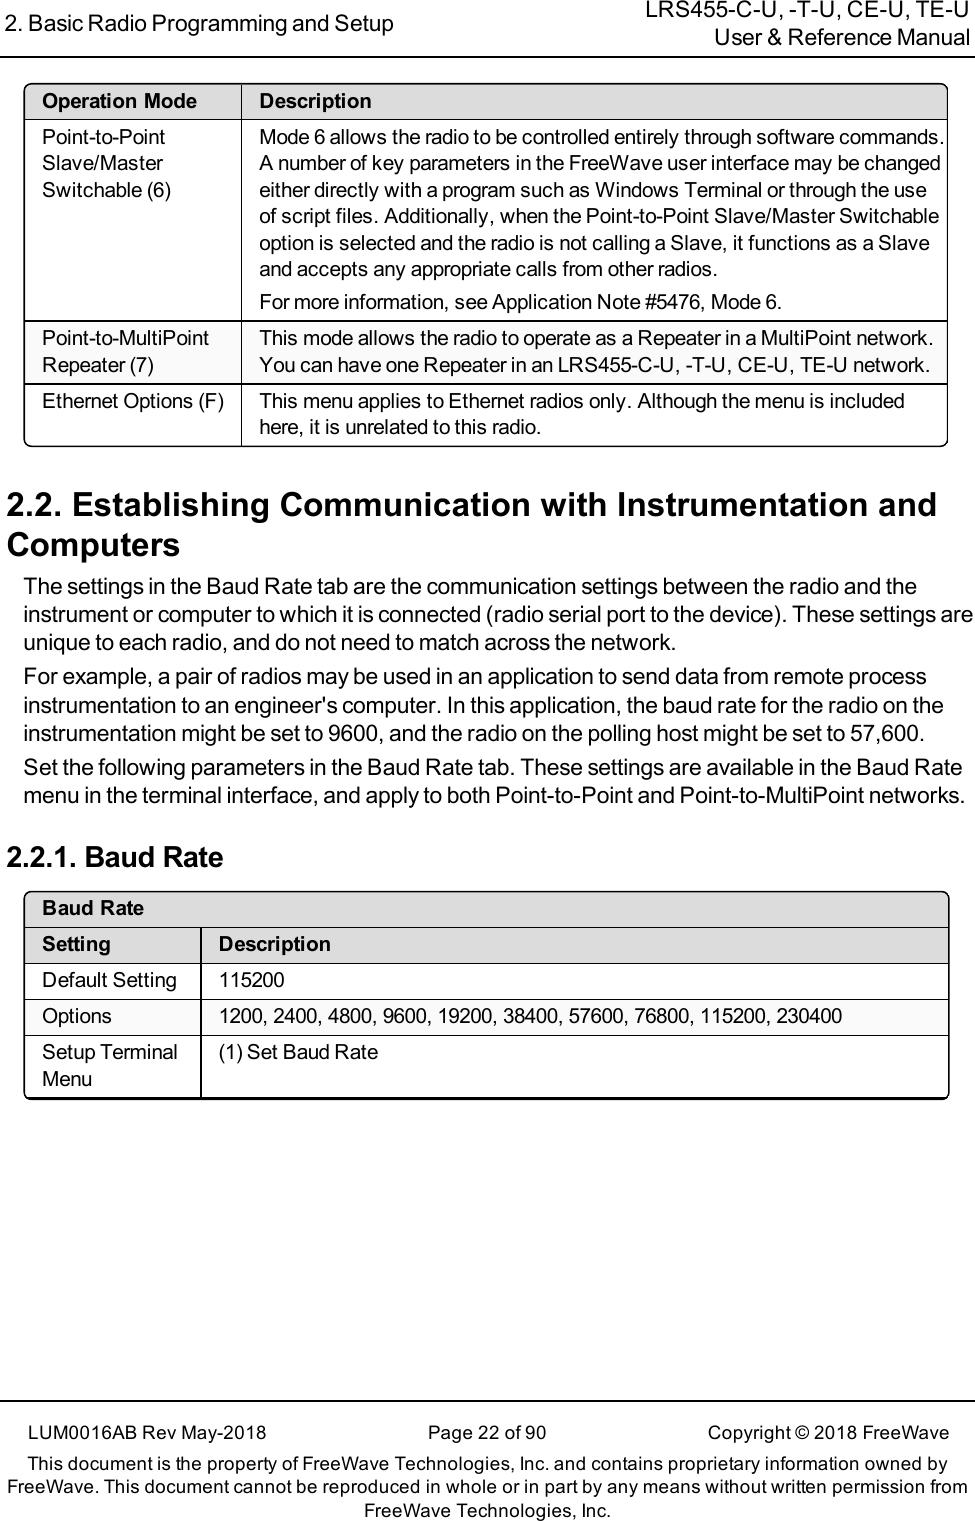 2. Basic Radio Programming and Setup LRS455-C-U, -T-U, CE-U, TE-UUser &amp; Reference ManualLUM0016AB Rev May-2018 Page 22 of 90 Copyright © 2018FreeWaveThis document is the property of FreeWave Technologies, Inc. and contains proprietary information owned byFreeWave. This document cannot be reproduced in whole or in part by any means without written permission fromFreeWave Technologies, Inc.Operation Mode DescriptionPoint-to-PointSlave/MasterSwitchable (6)Mode 6 allows the radio to be controlled entirely through software commands.A number of key parameters in the FreeWave user interface may be changedeither directly with a program such as Windows Terminal or through the useof script files. Additionally, when the Point-to-Point Slave/Master Switchableoption is selected and the radio is not calling a Slave, it functions as a Slaveand accepts any appropriate calls from other radios.For more information, see Application Note #5476, Mode 6.Point-to-MultiPointRepeater (7)This mode allows the radio to operate as a Repeater in a MultiPoint network.You can have one Repeater in an LRS455-C-U, -T-U, CE-U, TE-U network.Ethernet Options (F) This menu applies to Ethernet radios only. Although the menu is includedhere, it is unrelated to this radio.2.2. Establishing Communication with Instrumentation andComputersThe settings in the Baud Rate tab are the communication settings between the radio and theinstrument or computer to which it is connected (radio serial port to the device). These settings areunique to each radio, and do not need to match across the network.For example, a pair of radios may be used in an application to send data from remote processinstrumentation to an engineer&apos;s computer. In this application, the baud rate for the radio on theinstrumentation might be set to 9600, and the radio on the polling host might be set to 57,600.Set the following parameters in the Baud Rate tab. These settings are available in the Baud Ratemenu in the terminal interface, and apply to both Point-to-Point and Point-to-MultiPoint networks.2.2.1. Baud RateBaud RateSetting DescriptionDefault Setting 115200Options 1200, 2400, 4800, 9600, 19200, 38400, 57600, 76800, 115200, 230400Setup TerminalMenu(1) Set Baud Rate